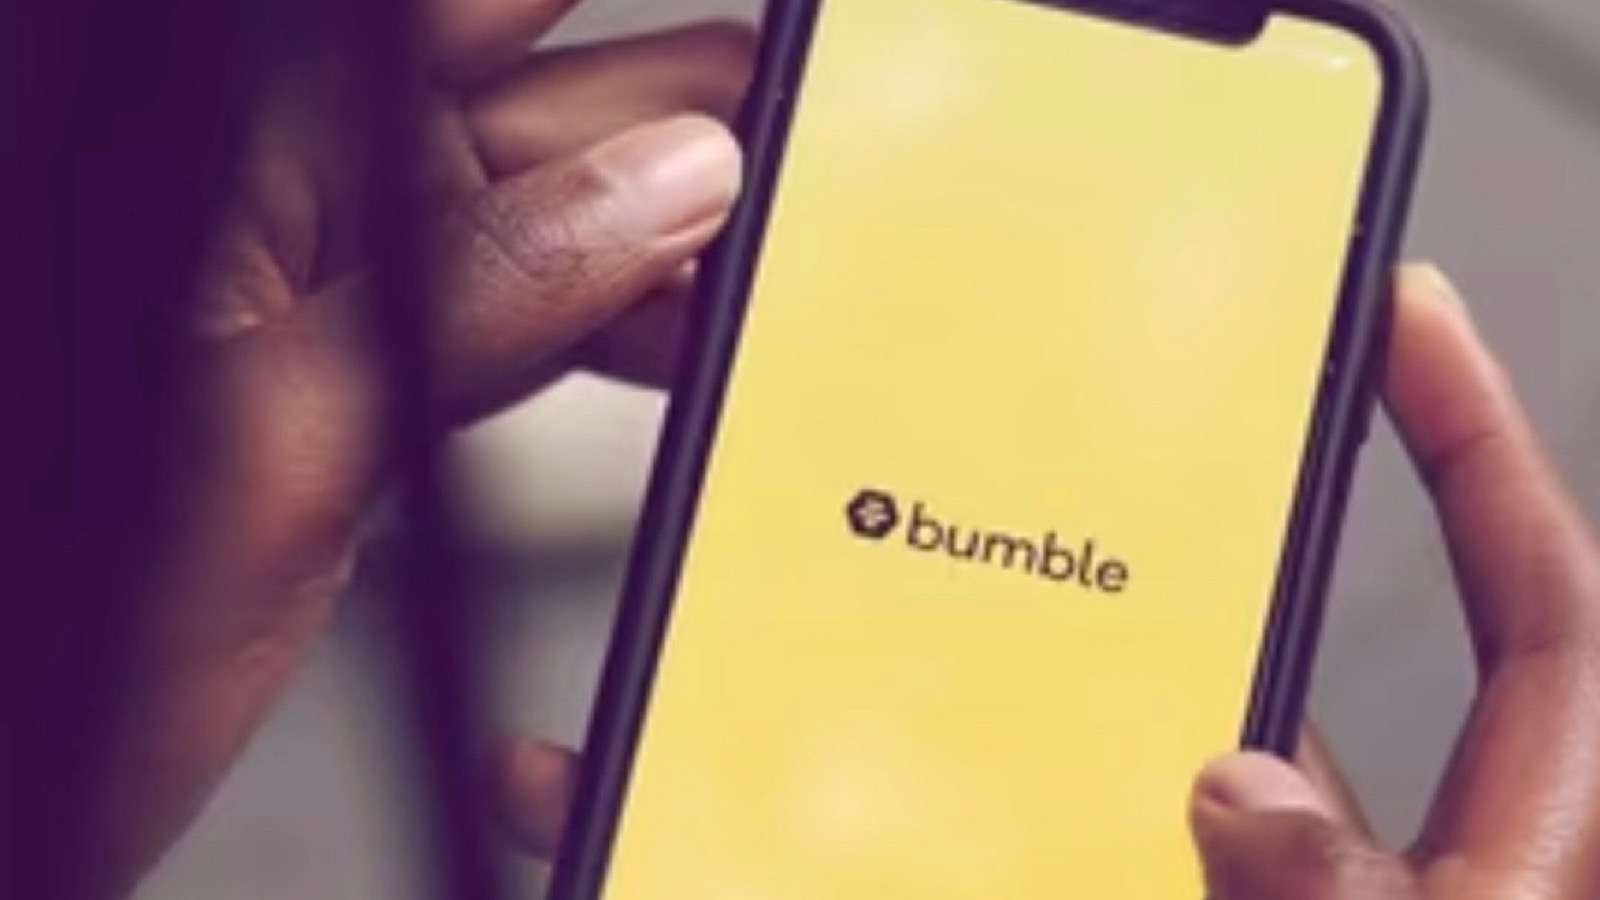 woman's husband found on bumble after abandoning her